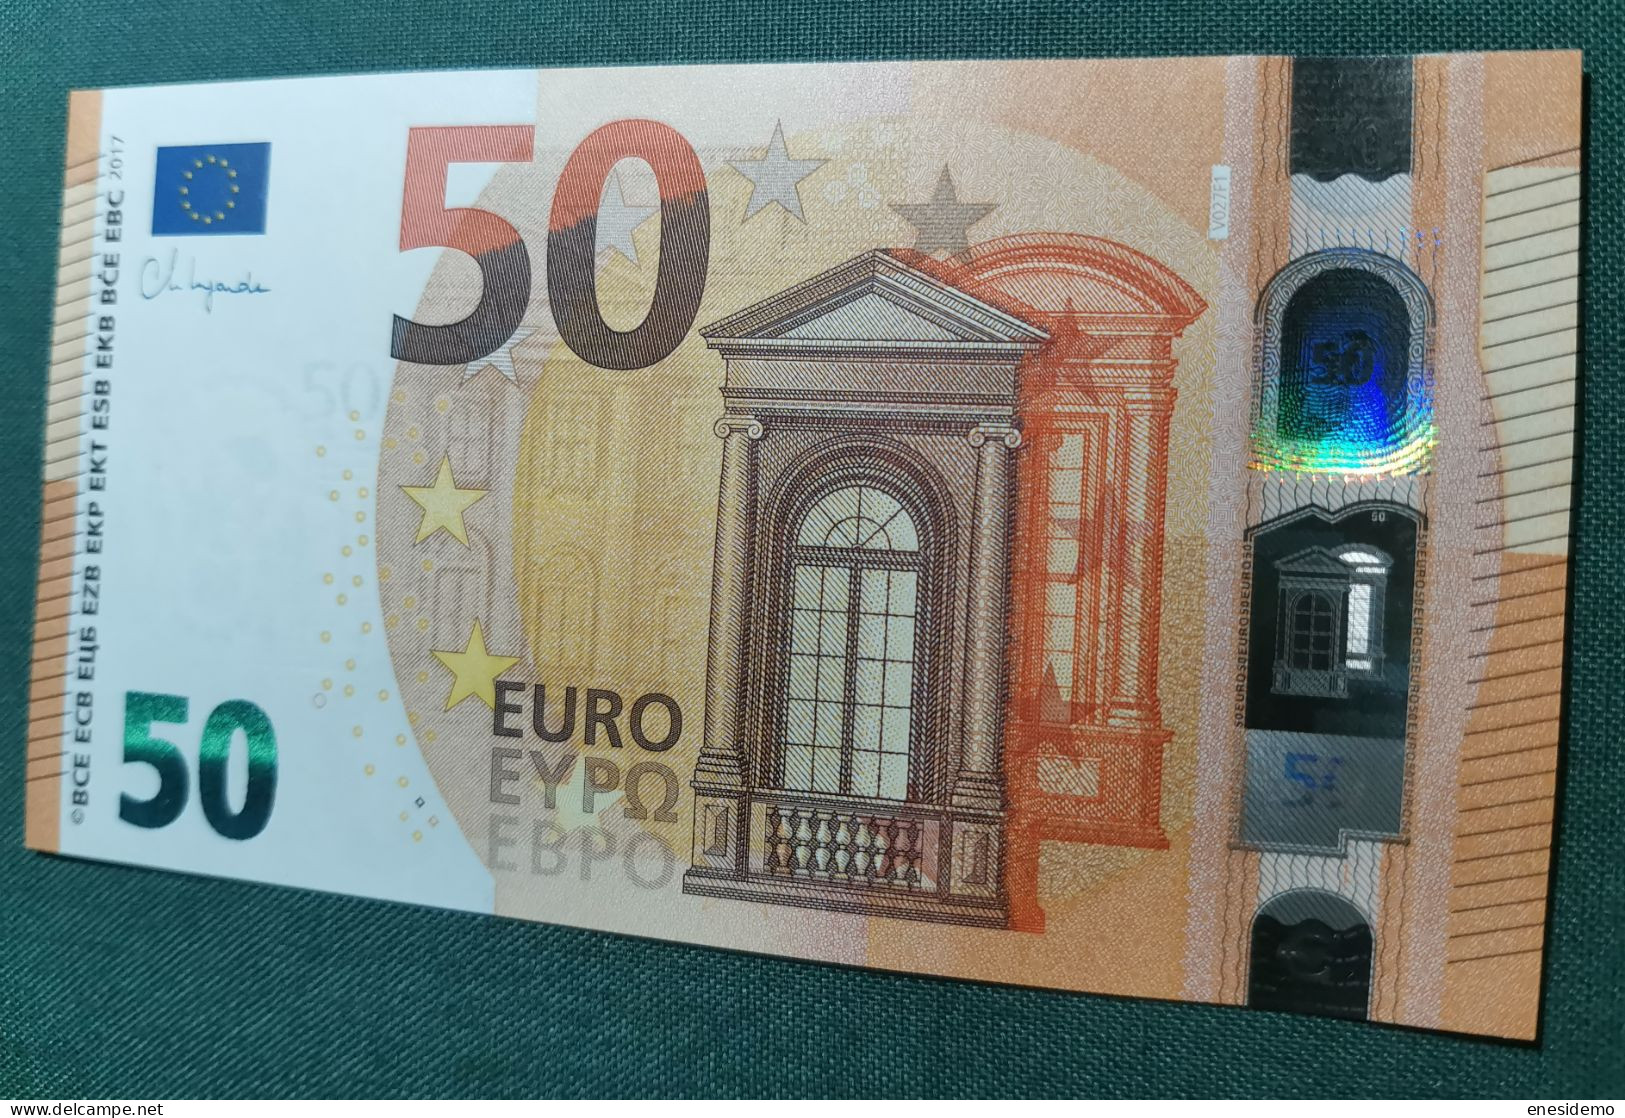 50 EURO SPAIN 2017 LAGARDE V027F1 VC SC FDS NICE NUMBER UNCIRCULATED PERFECT - 50 Euro